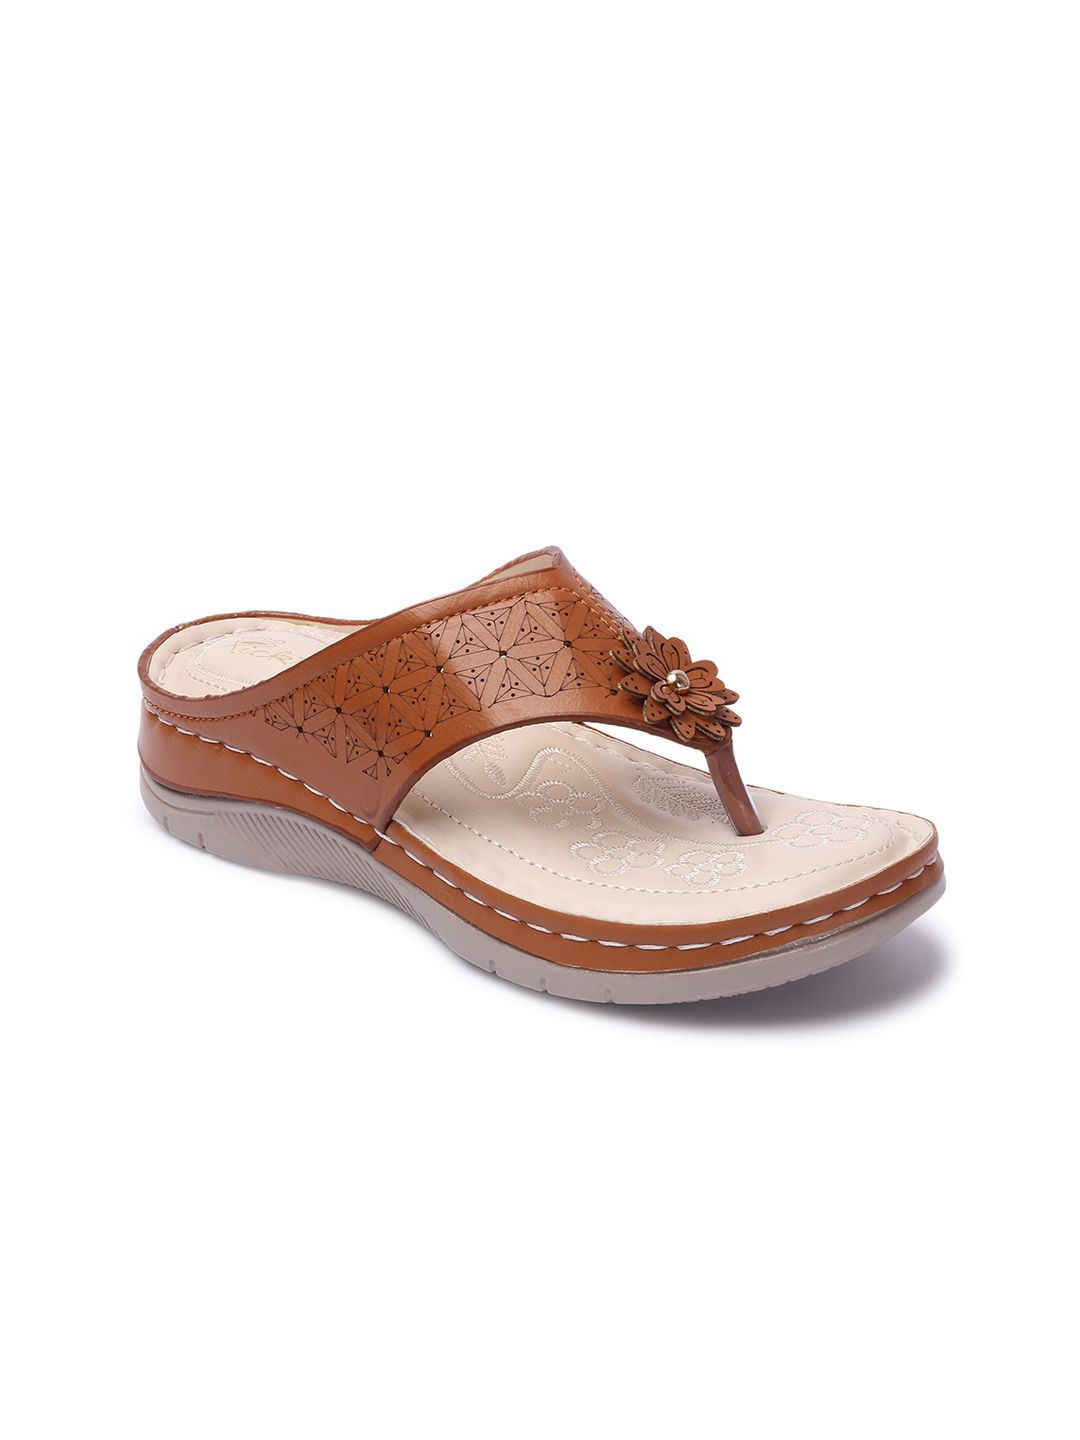 Picktoes Women Tan Wedge Sandals with Laser Cuts Price in India